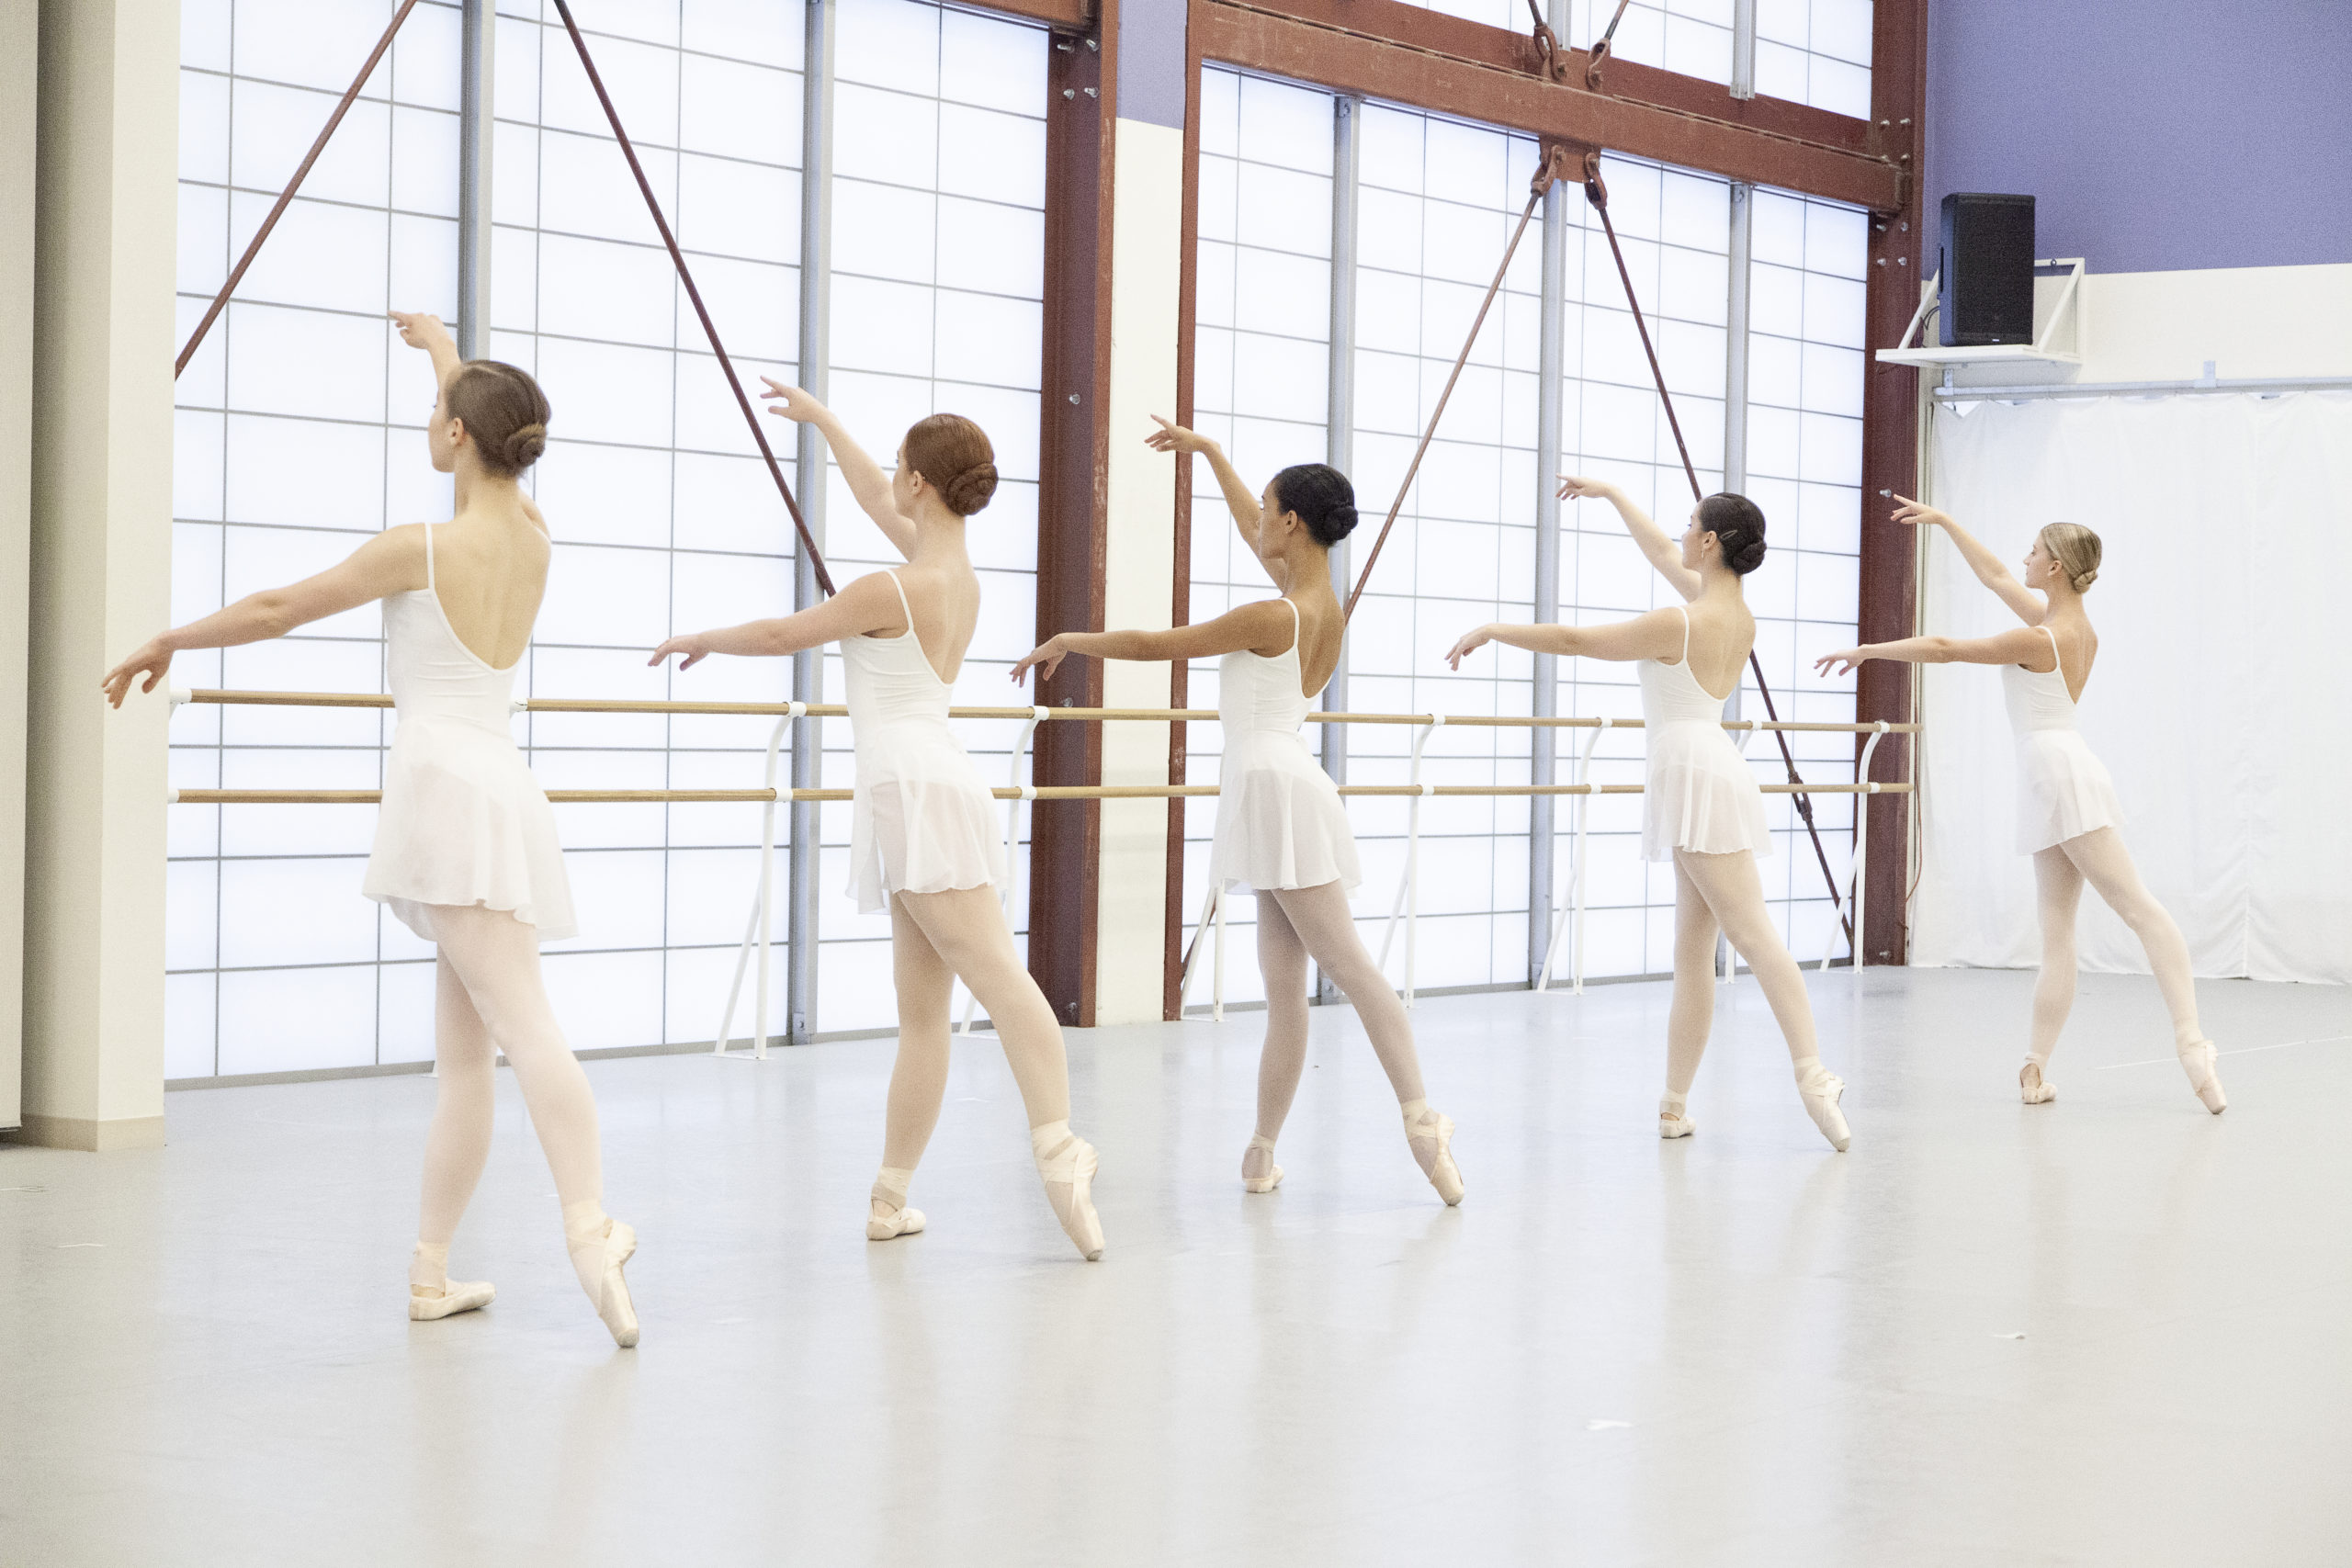 Five preprofessional female ballet dancers stand in tendu derrière facing the back of a bright studio. They are wearing white leotards and skirts and pointe shoes.